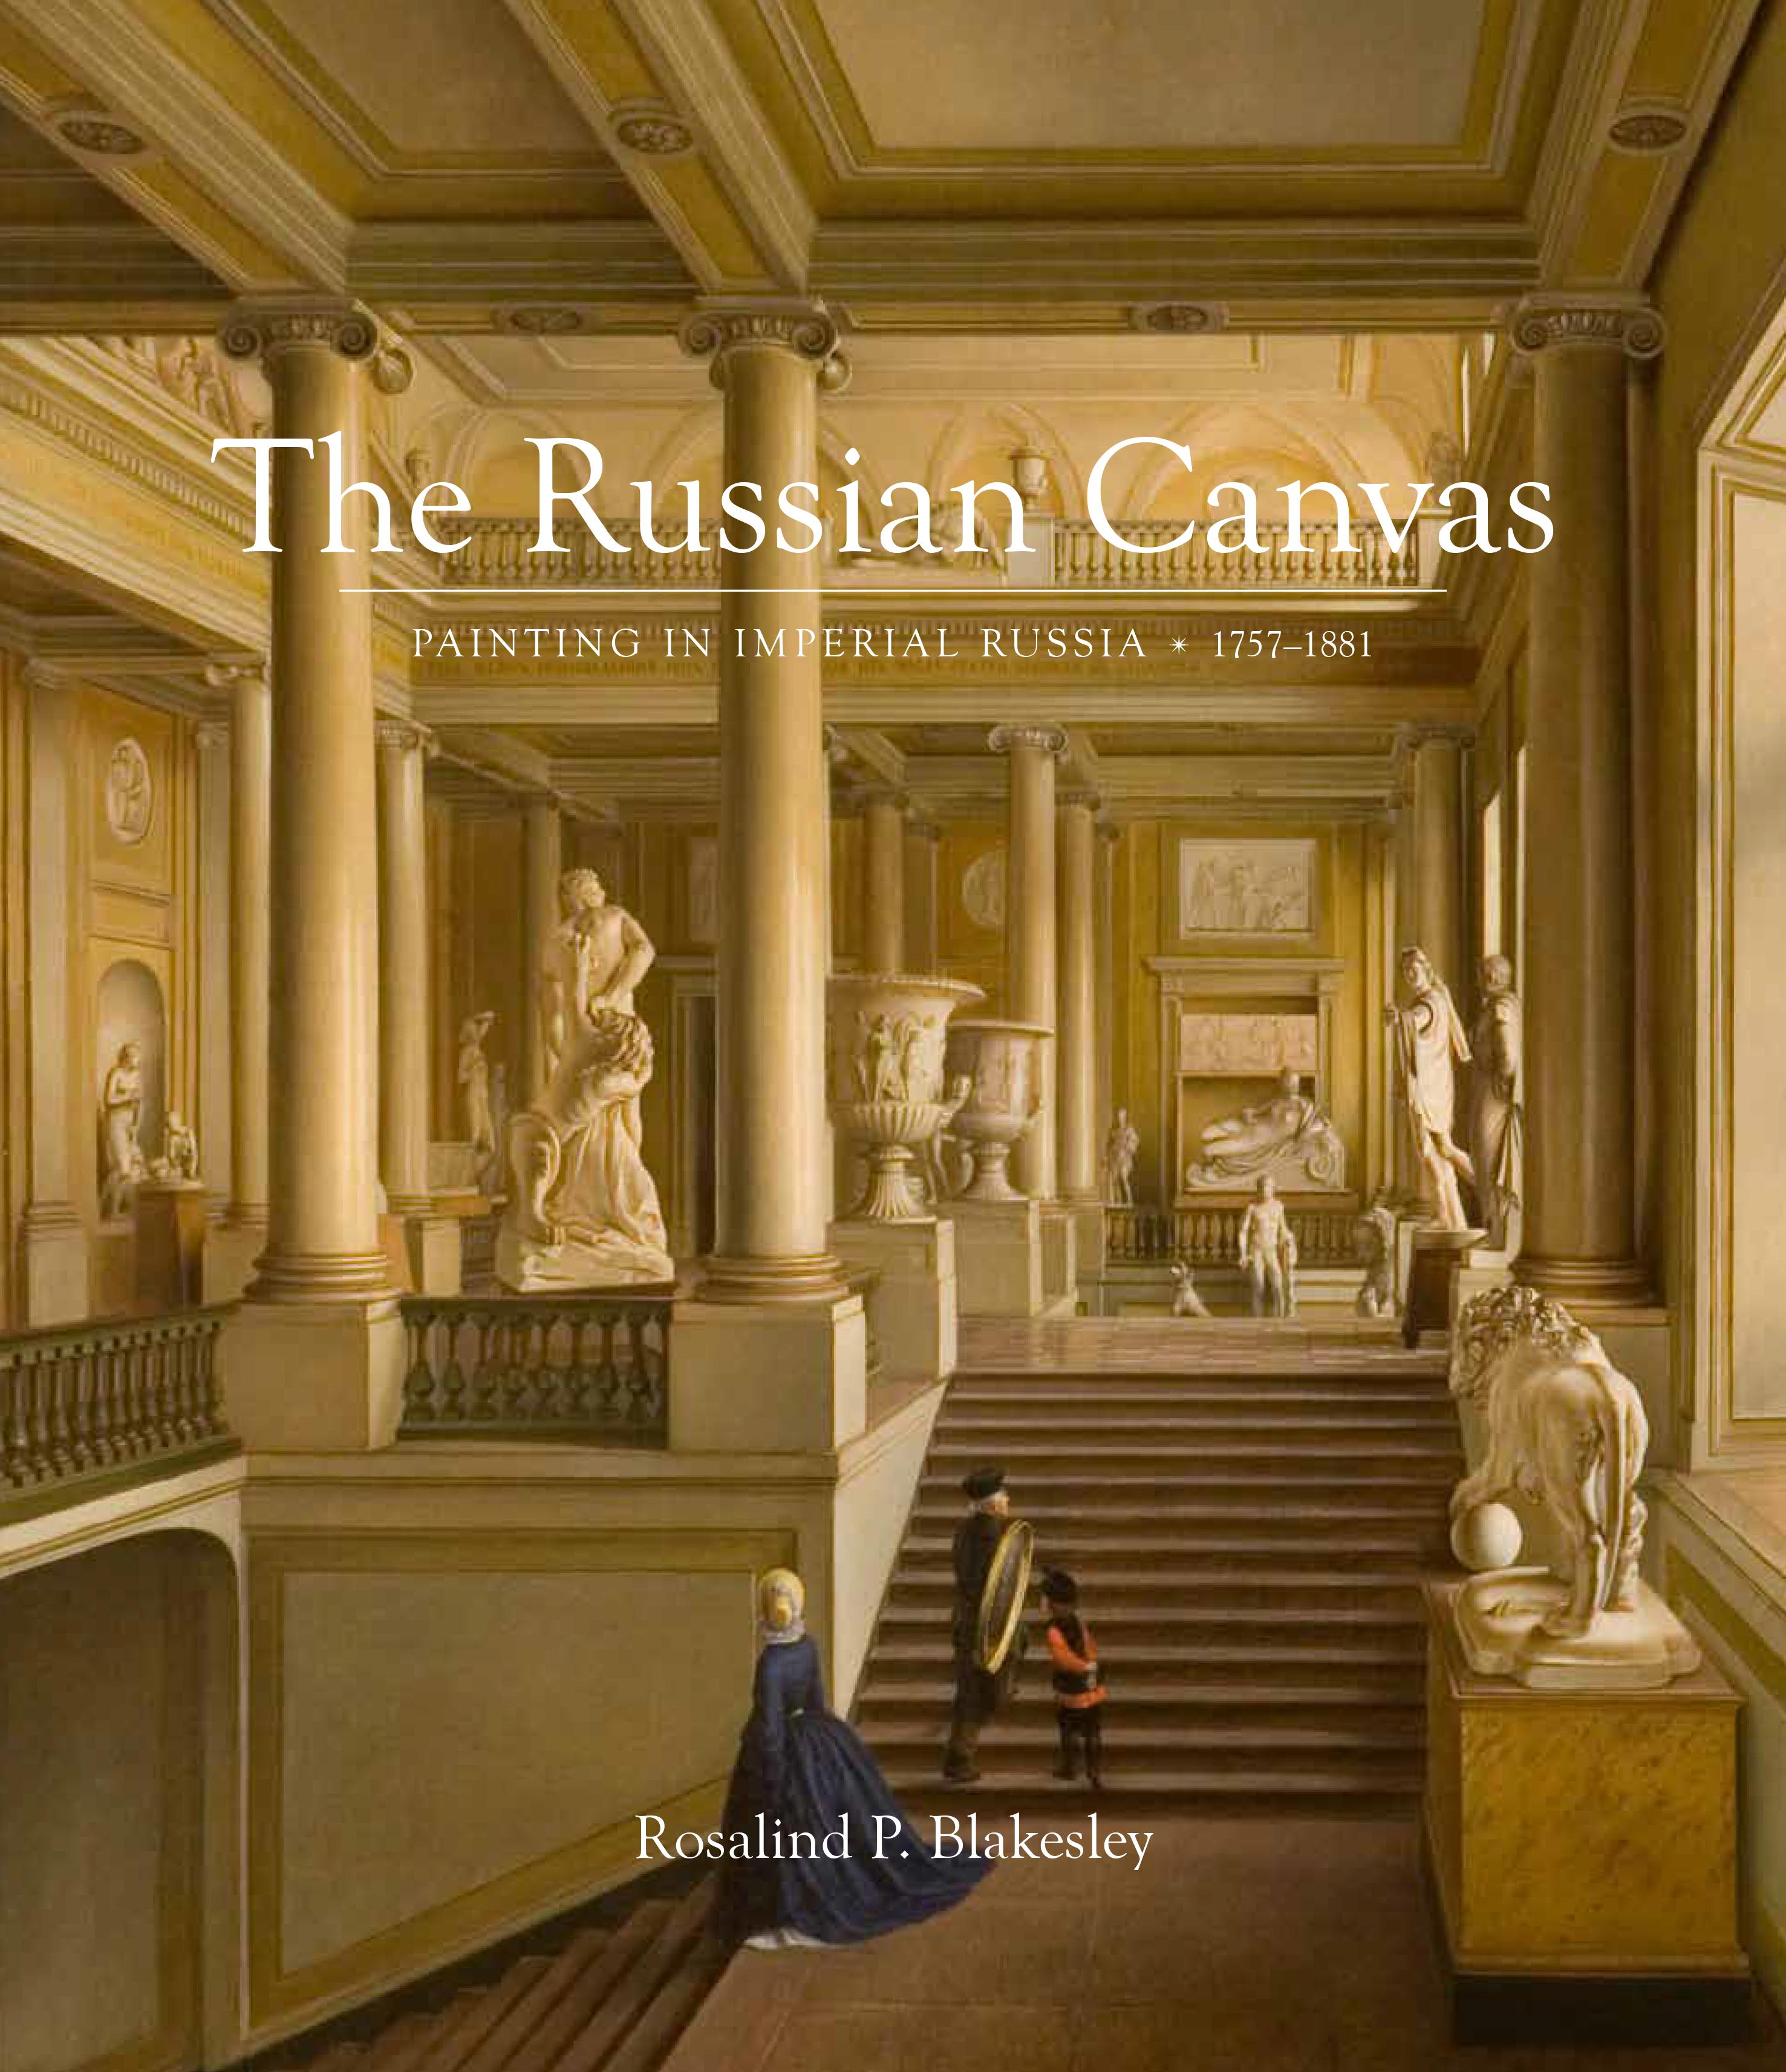 The Department would like to congratulate Dr Rosalind Blakesley who has won the fifth annual Pushkin House Russian Book Prize for her book entitled “The Russian Canvas: Painting in Imperial Russia, 1757-1881” 